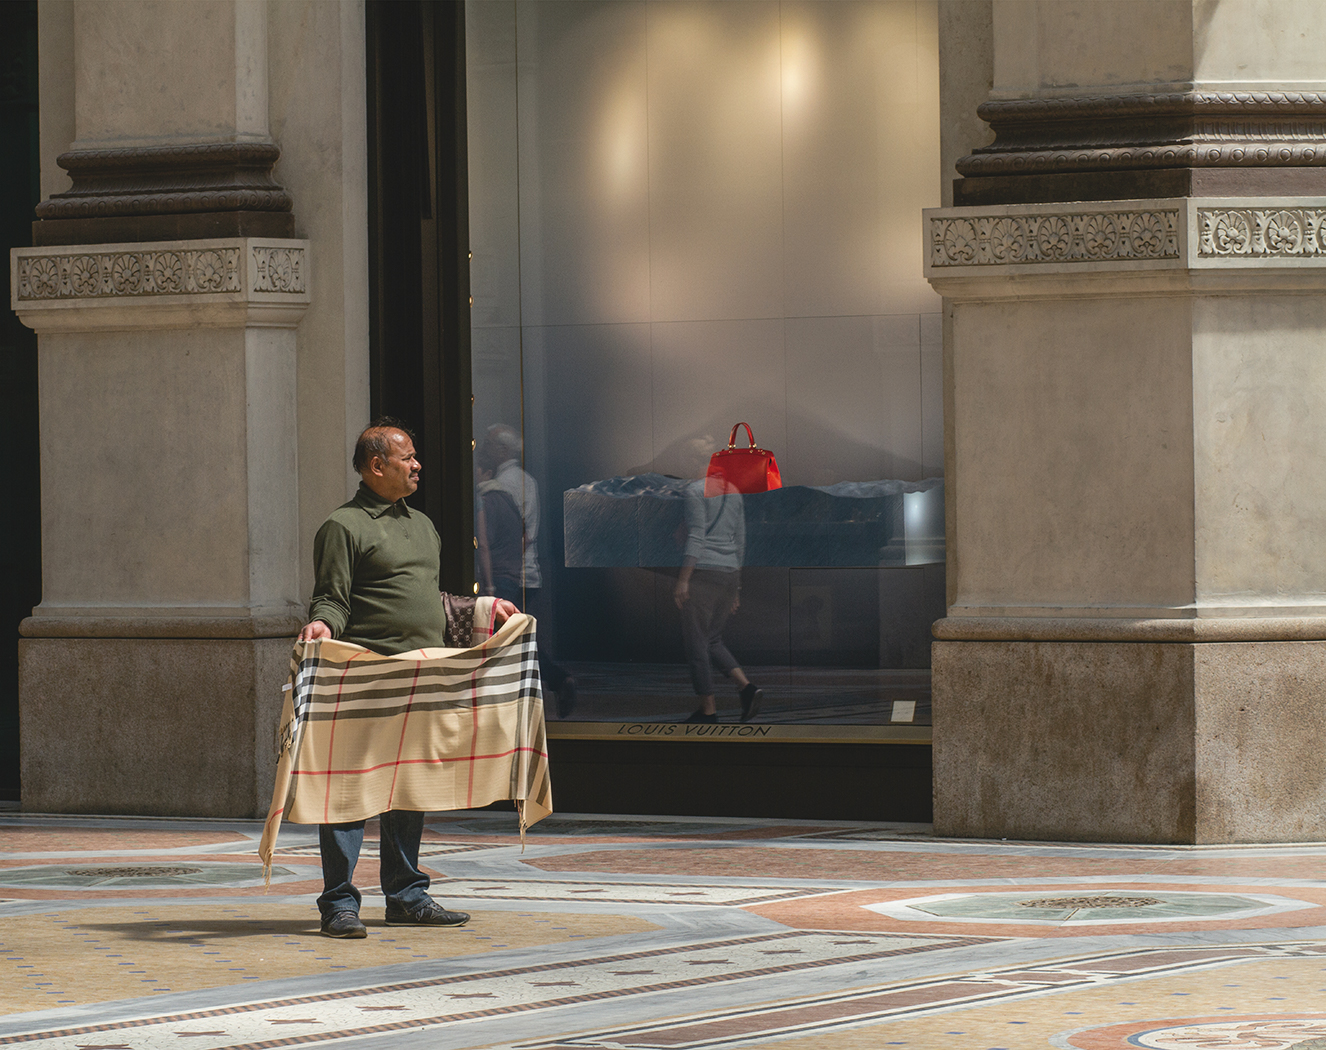 Milan.  Louis Vuitton in the window. A street seller with a shawl.